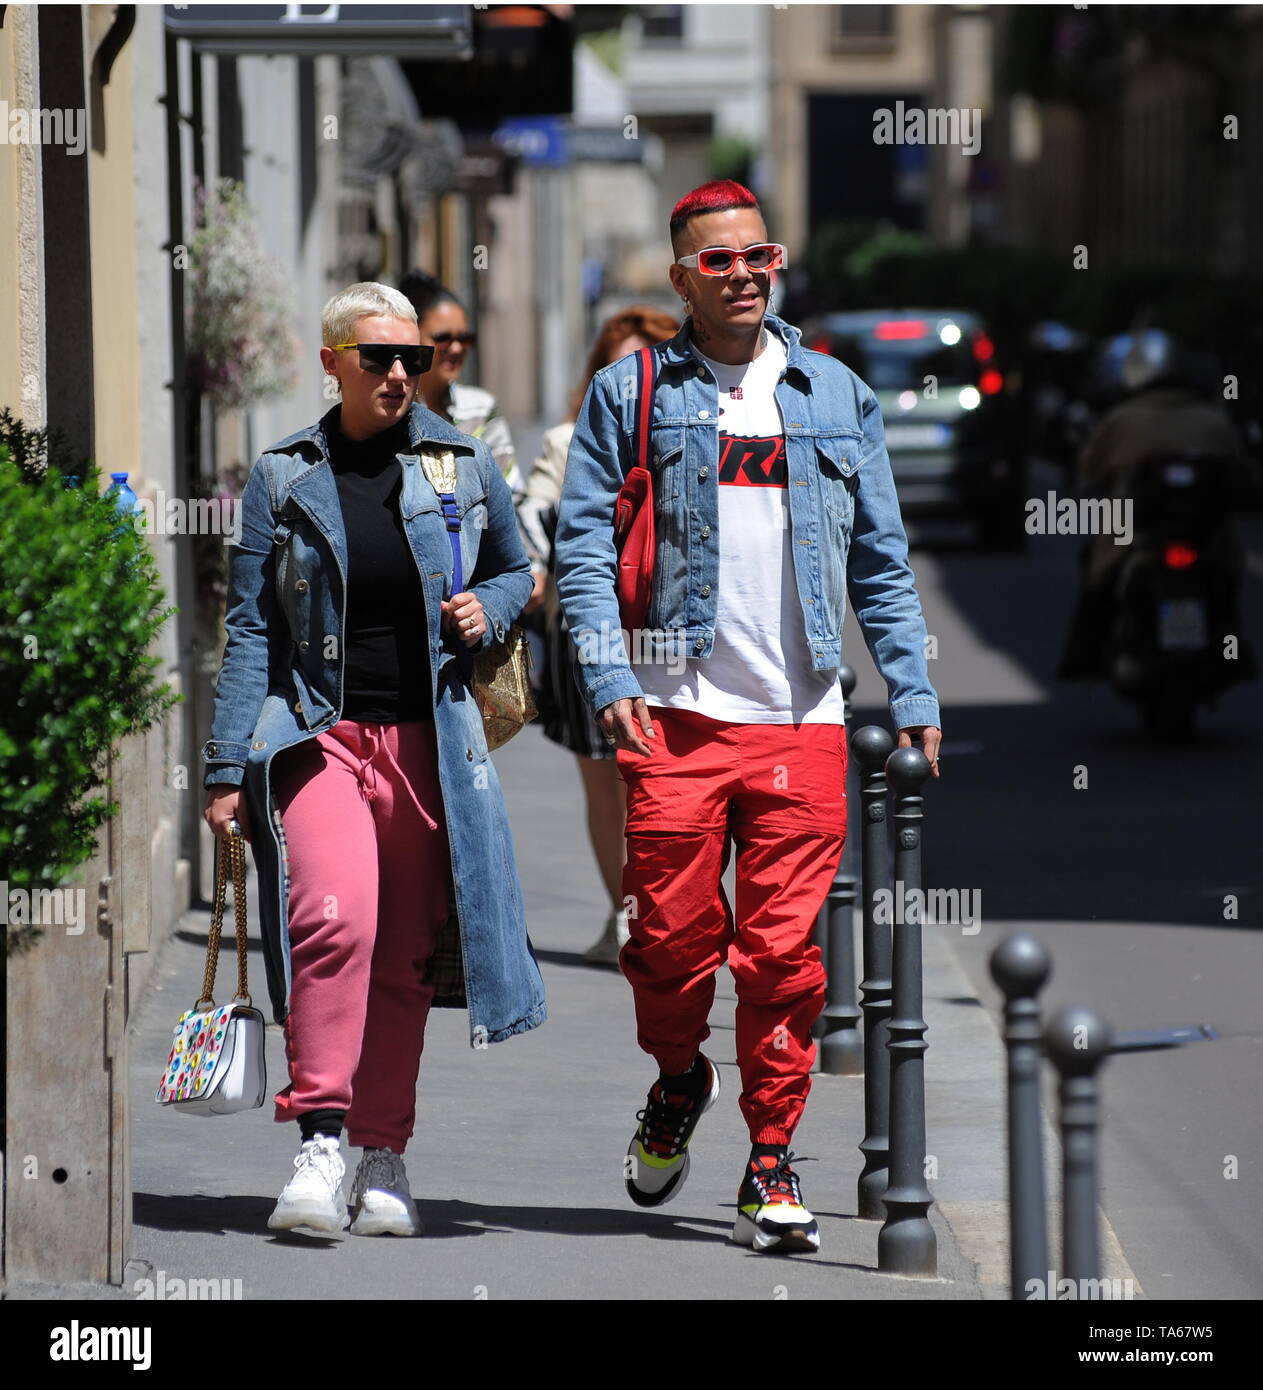 Milan, Sfera It took a lunch with a mysterious girl The rapper SFERA EBBASTA  caught lunch with a mysterious girl in a well-known restaurant in the  center. As soon as he notices